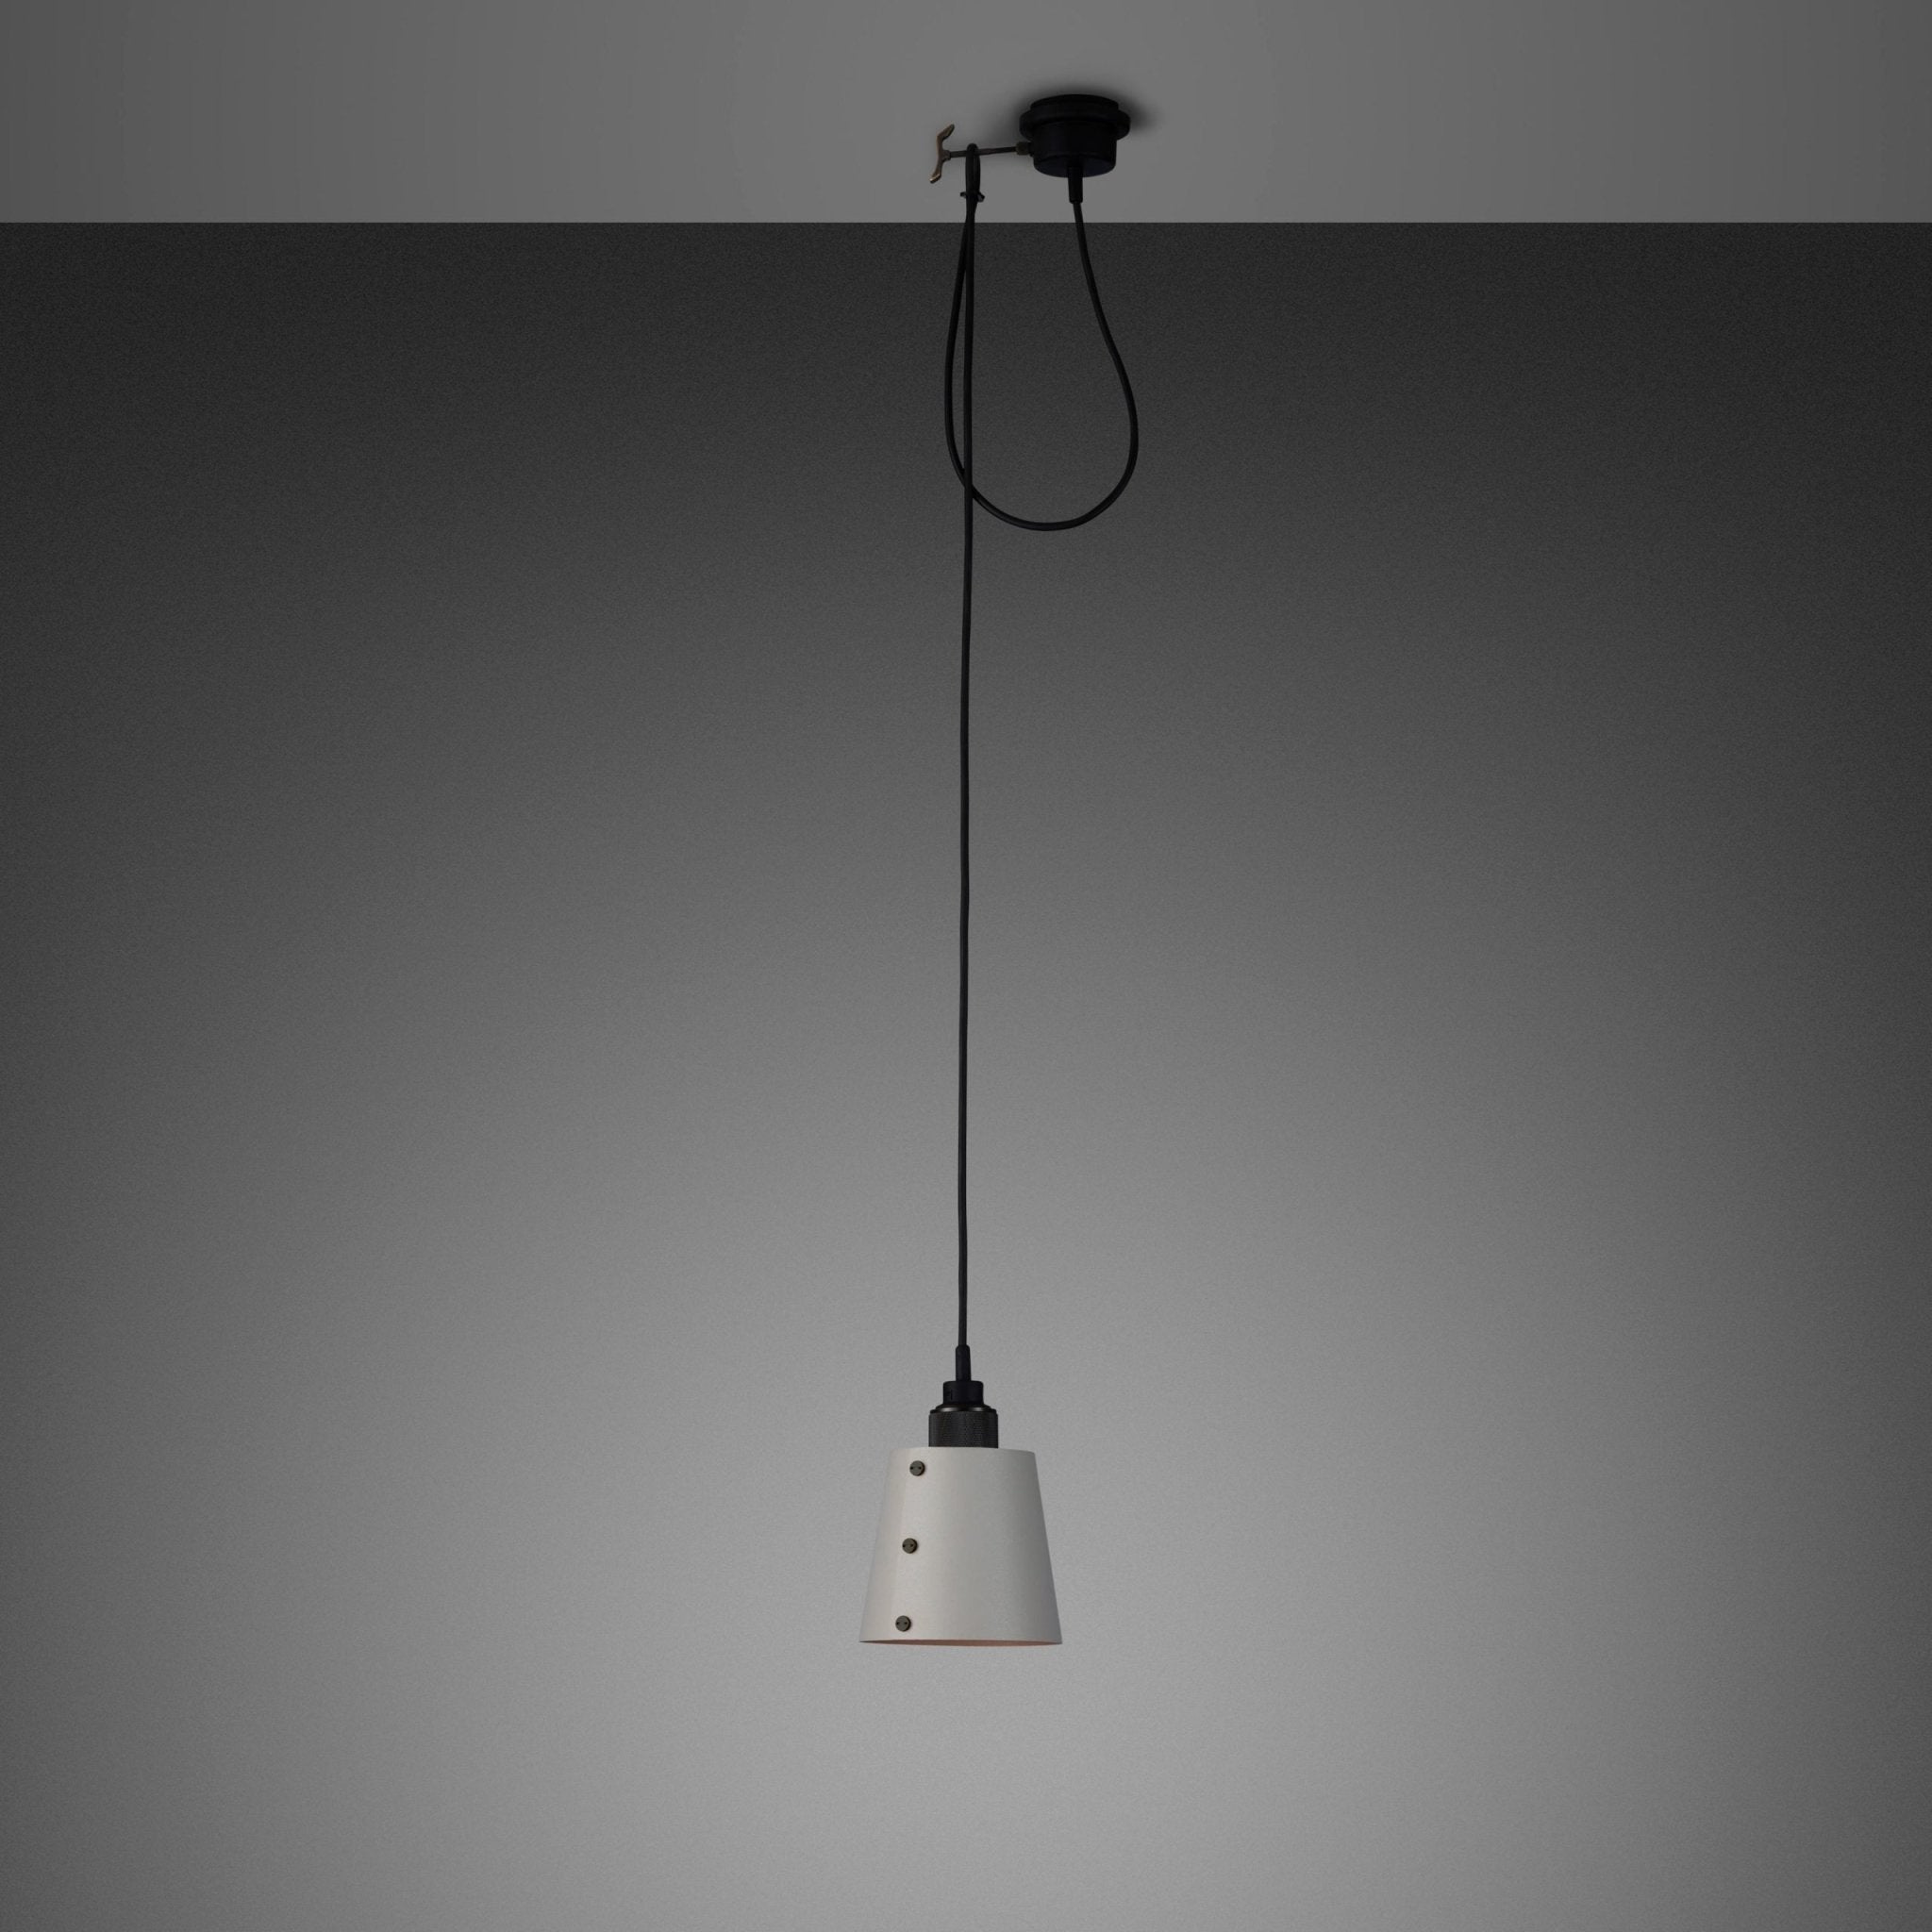 Buster and Punch - Hooked 1.0 / Klein Steen Shade 2.6m Hanglamp - KOOT